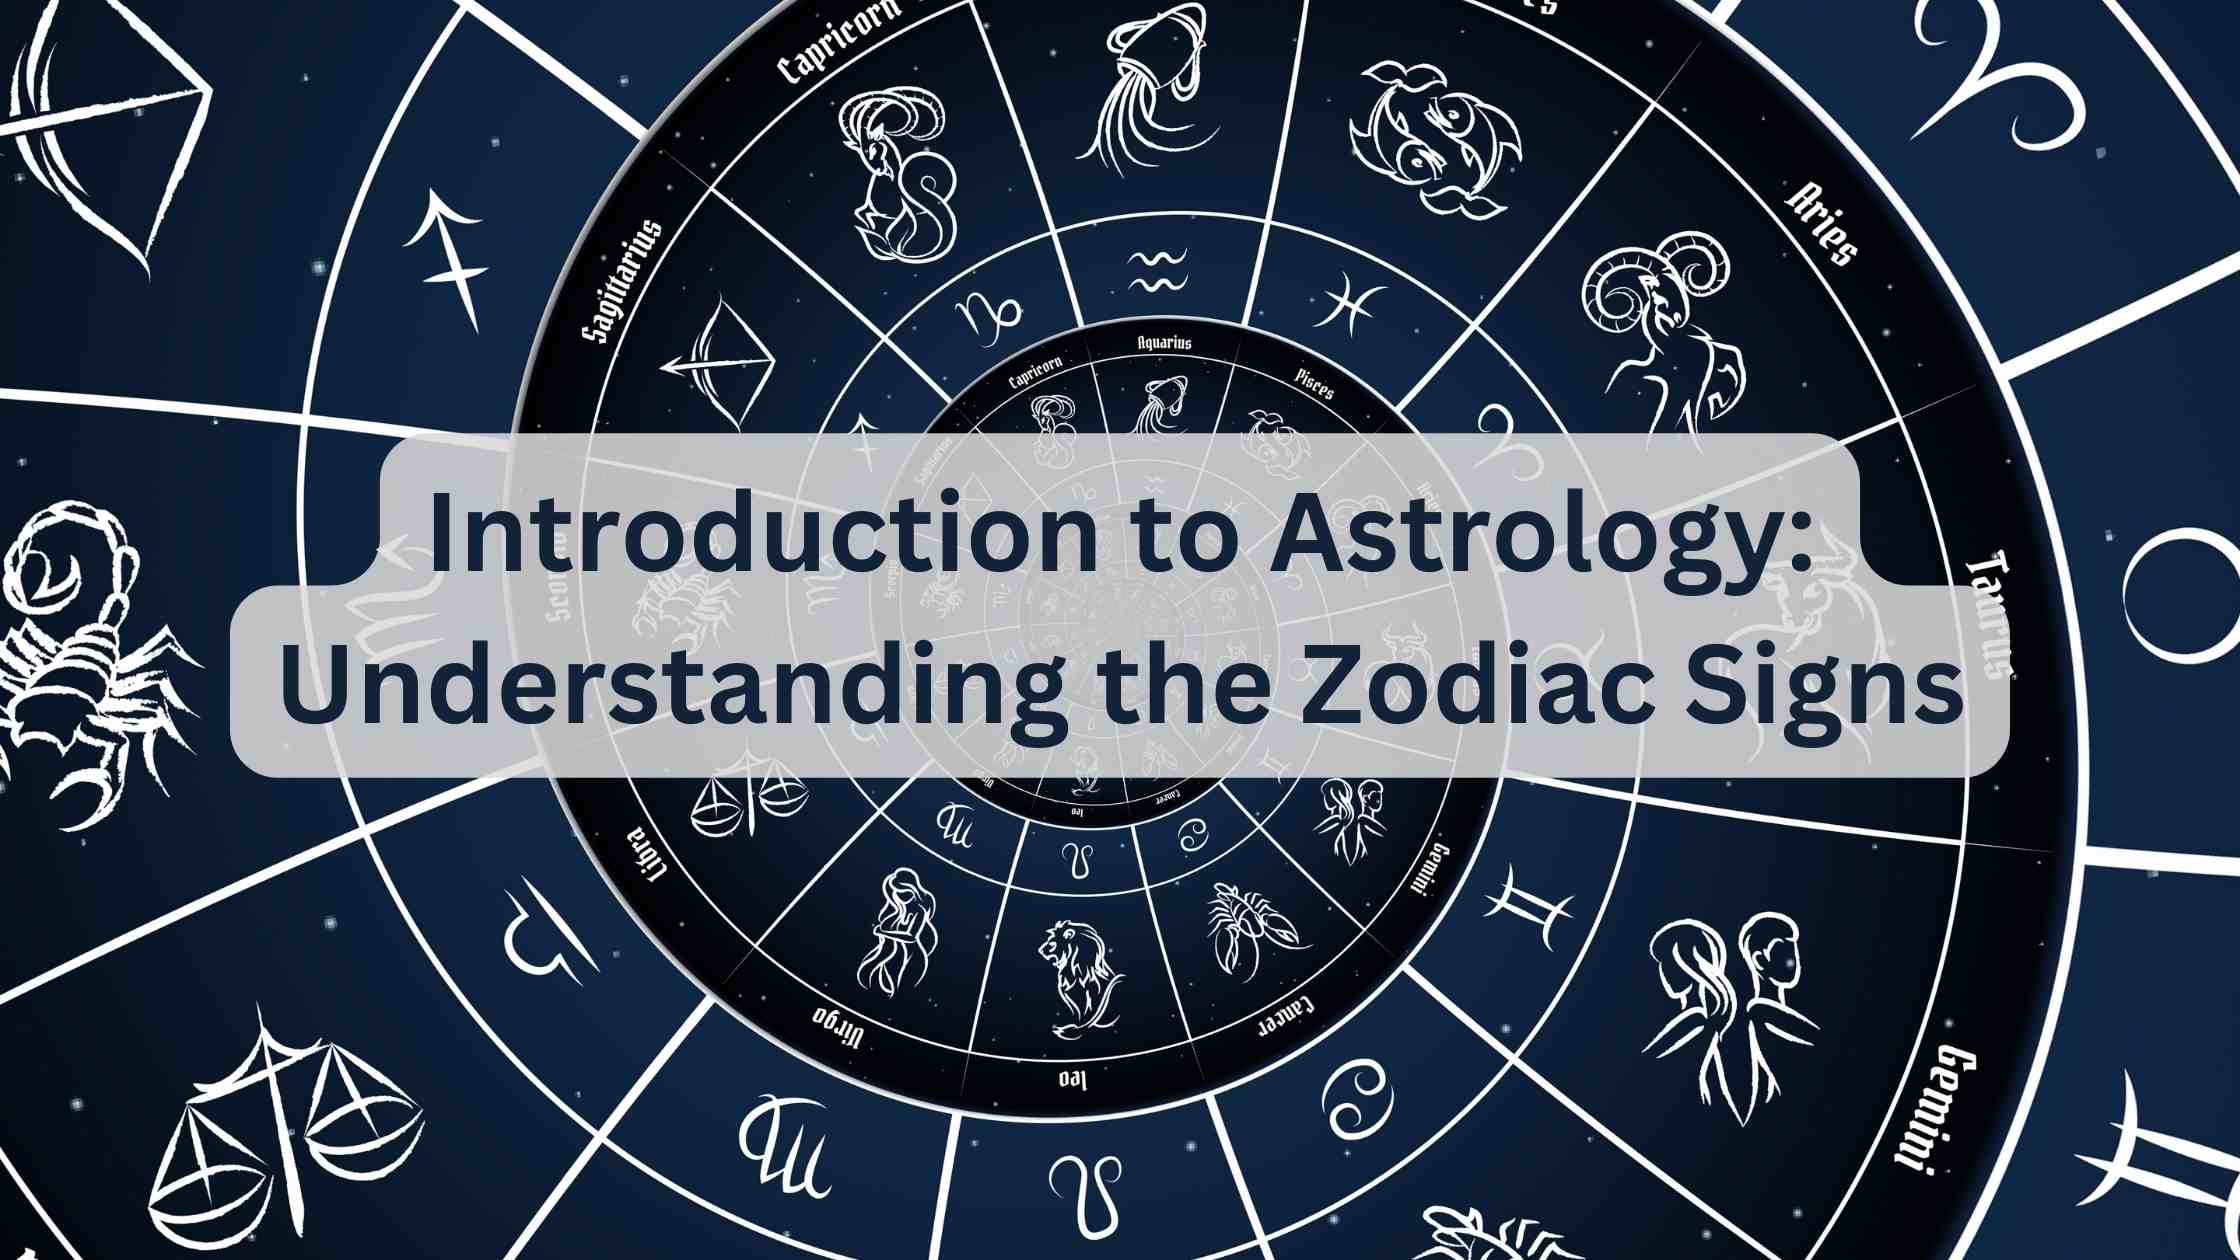 Introduction to Astrology: Understanding the Zodiac Signs